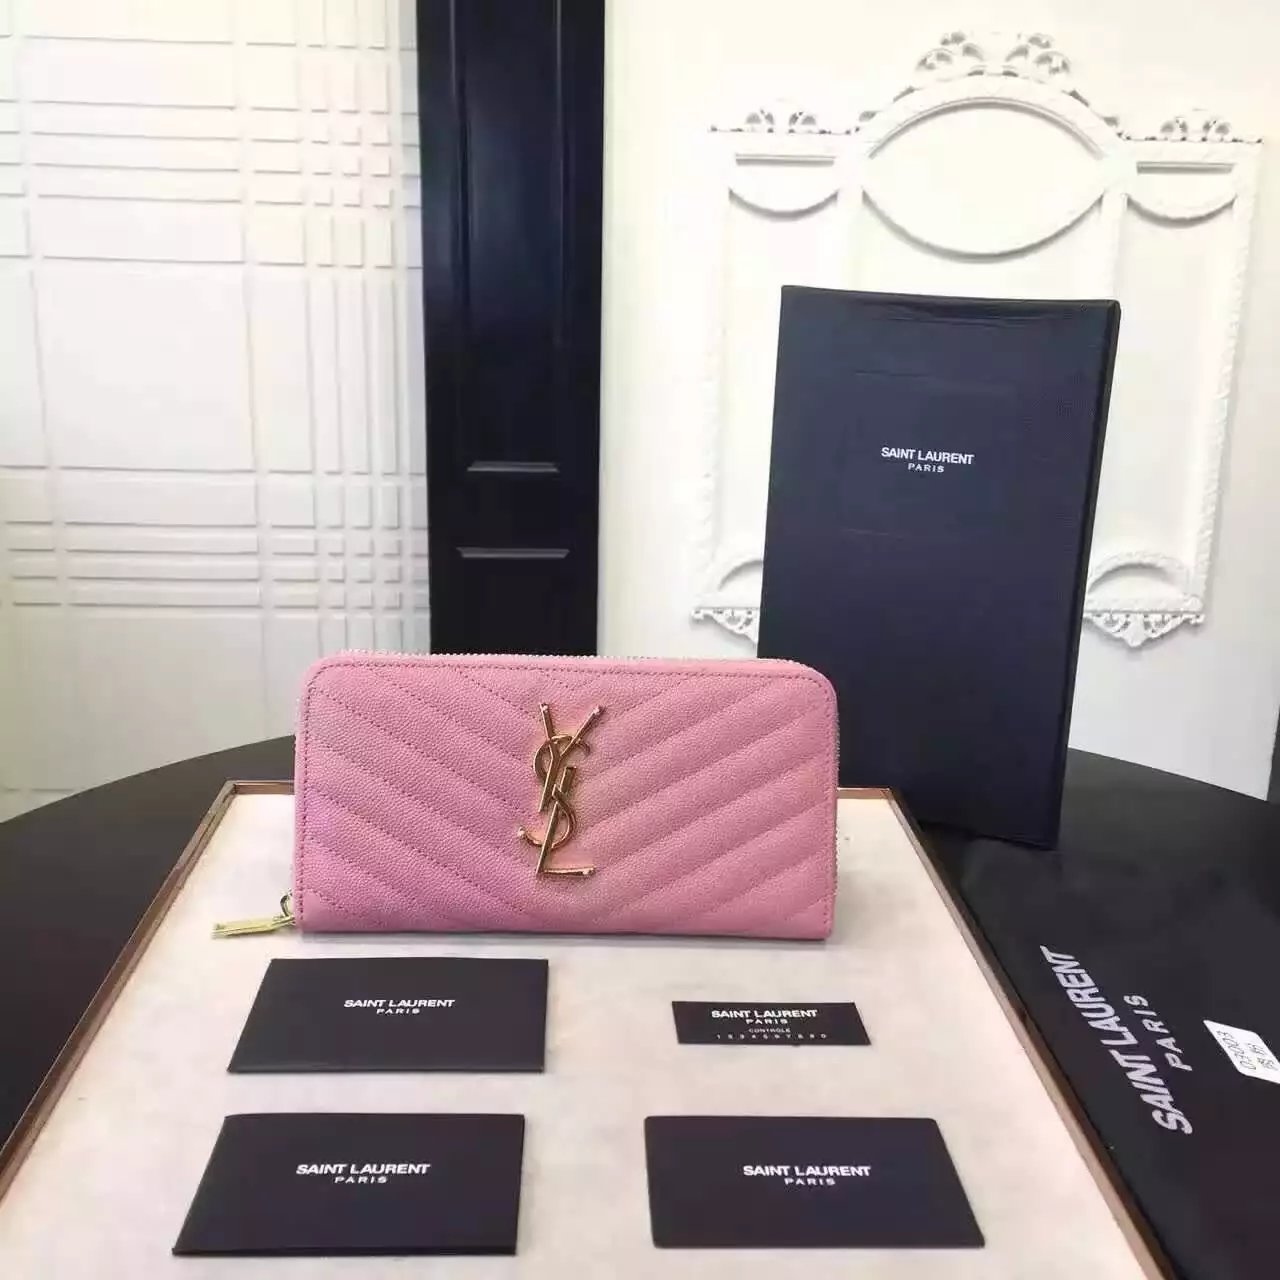 2016 Cheap YSL Out Sale with Free Shipping-Saint Laurent Monogram Zip Around Wallet in Pink Grain De Poudre Matelasse Textured Leather